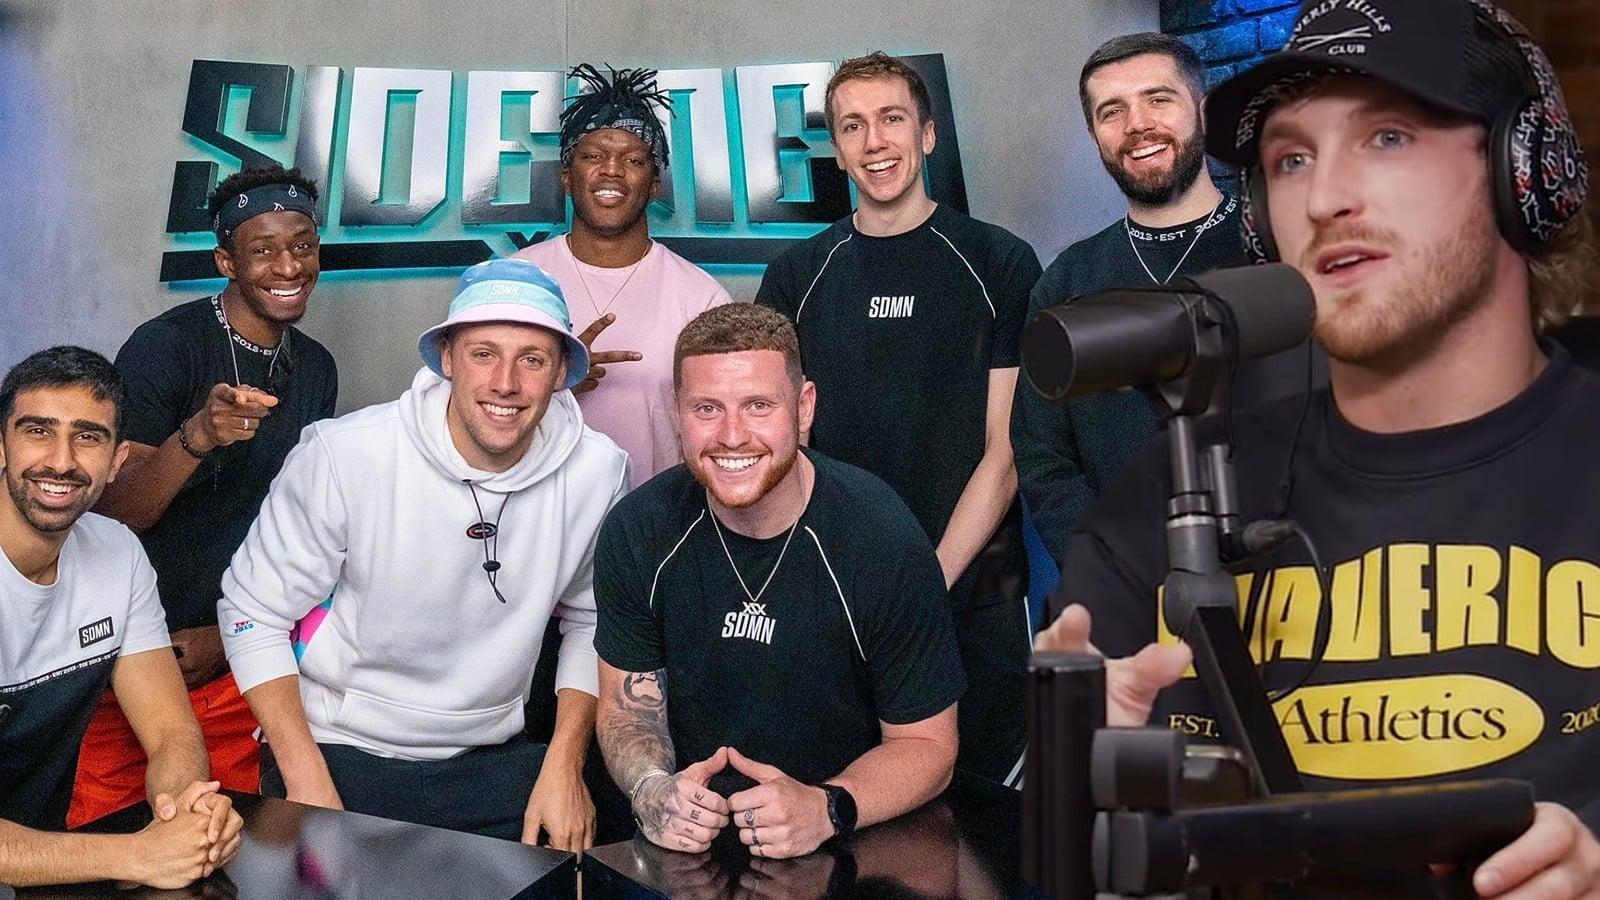 Sidemen Twitter group picture with Logan Paul speaking on IMPAULSIVE podcast